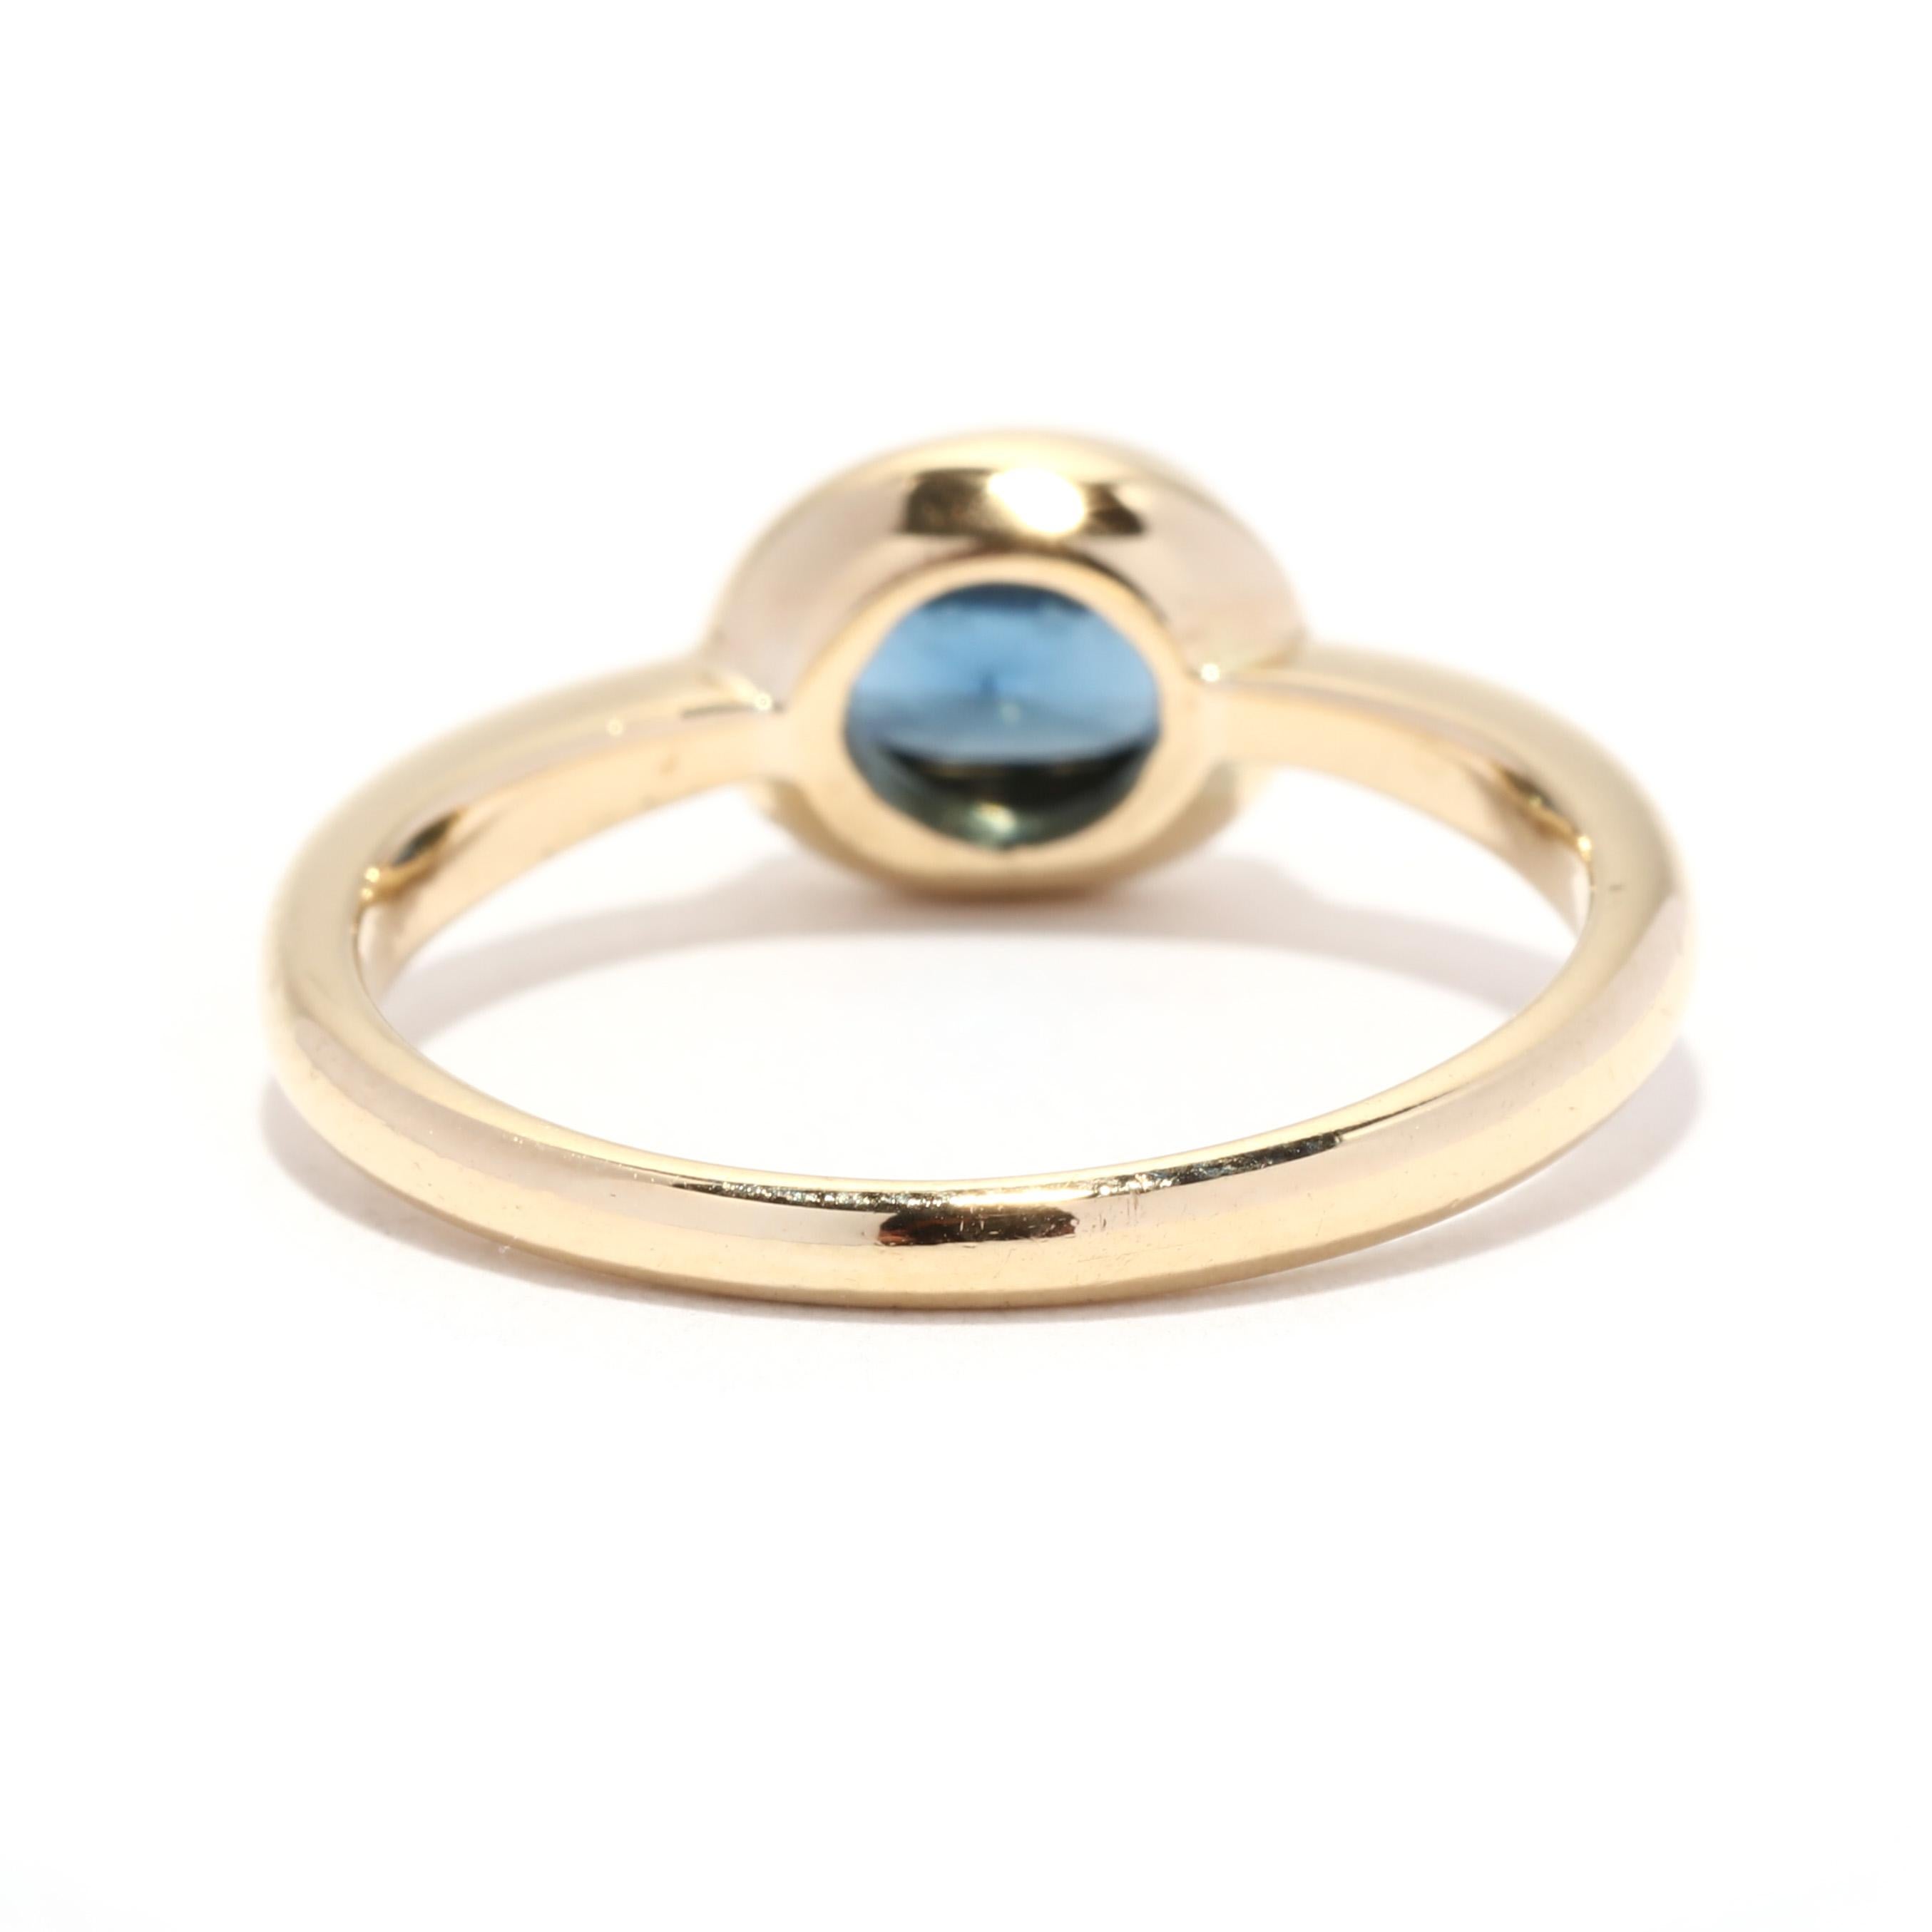 Oval Cut Natural Sapphire Engagement Ring, 18KT Yellow Gold, Ring